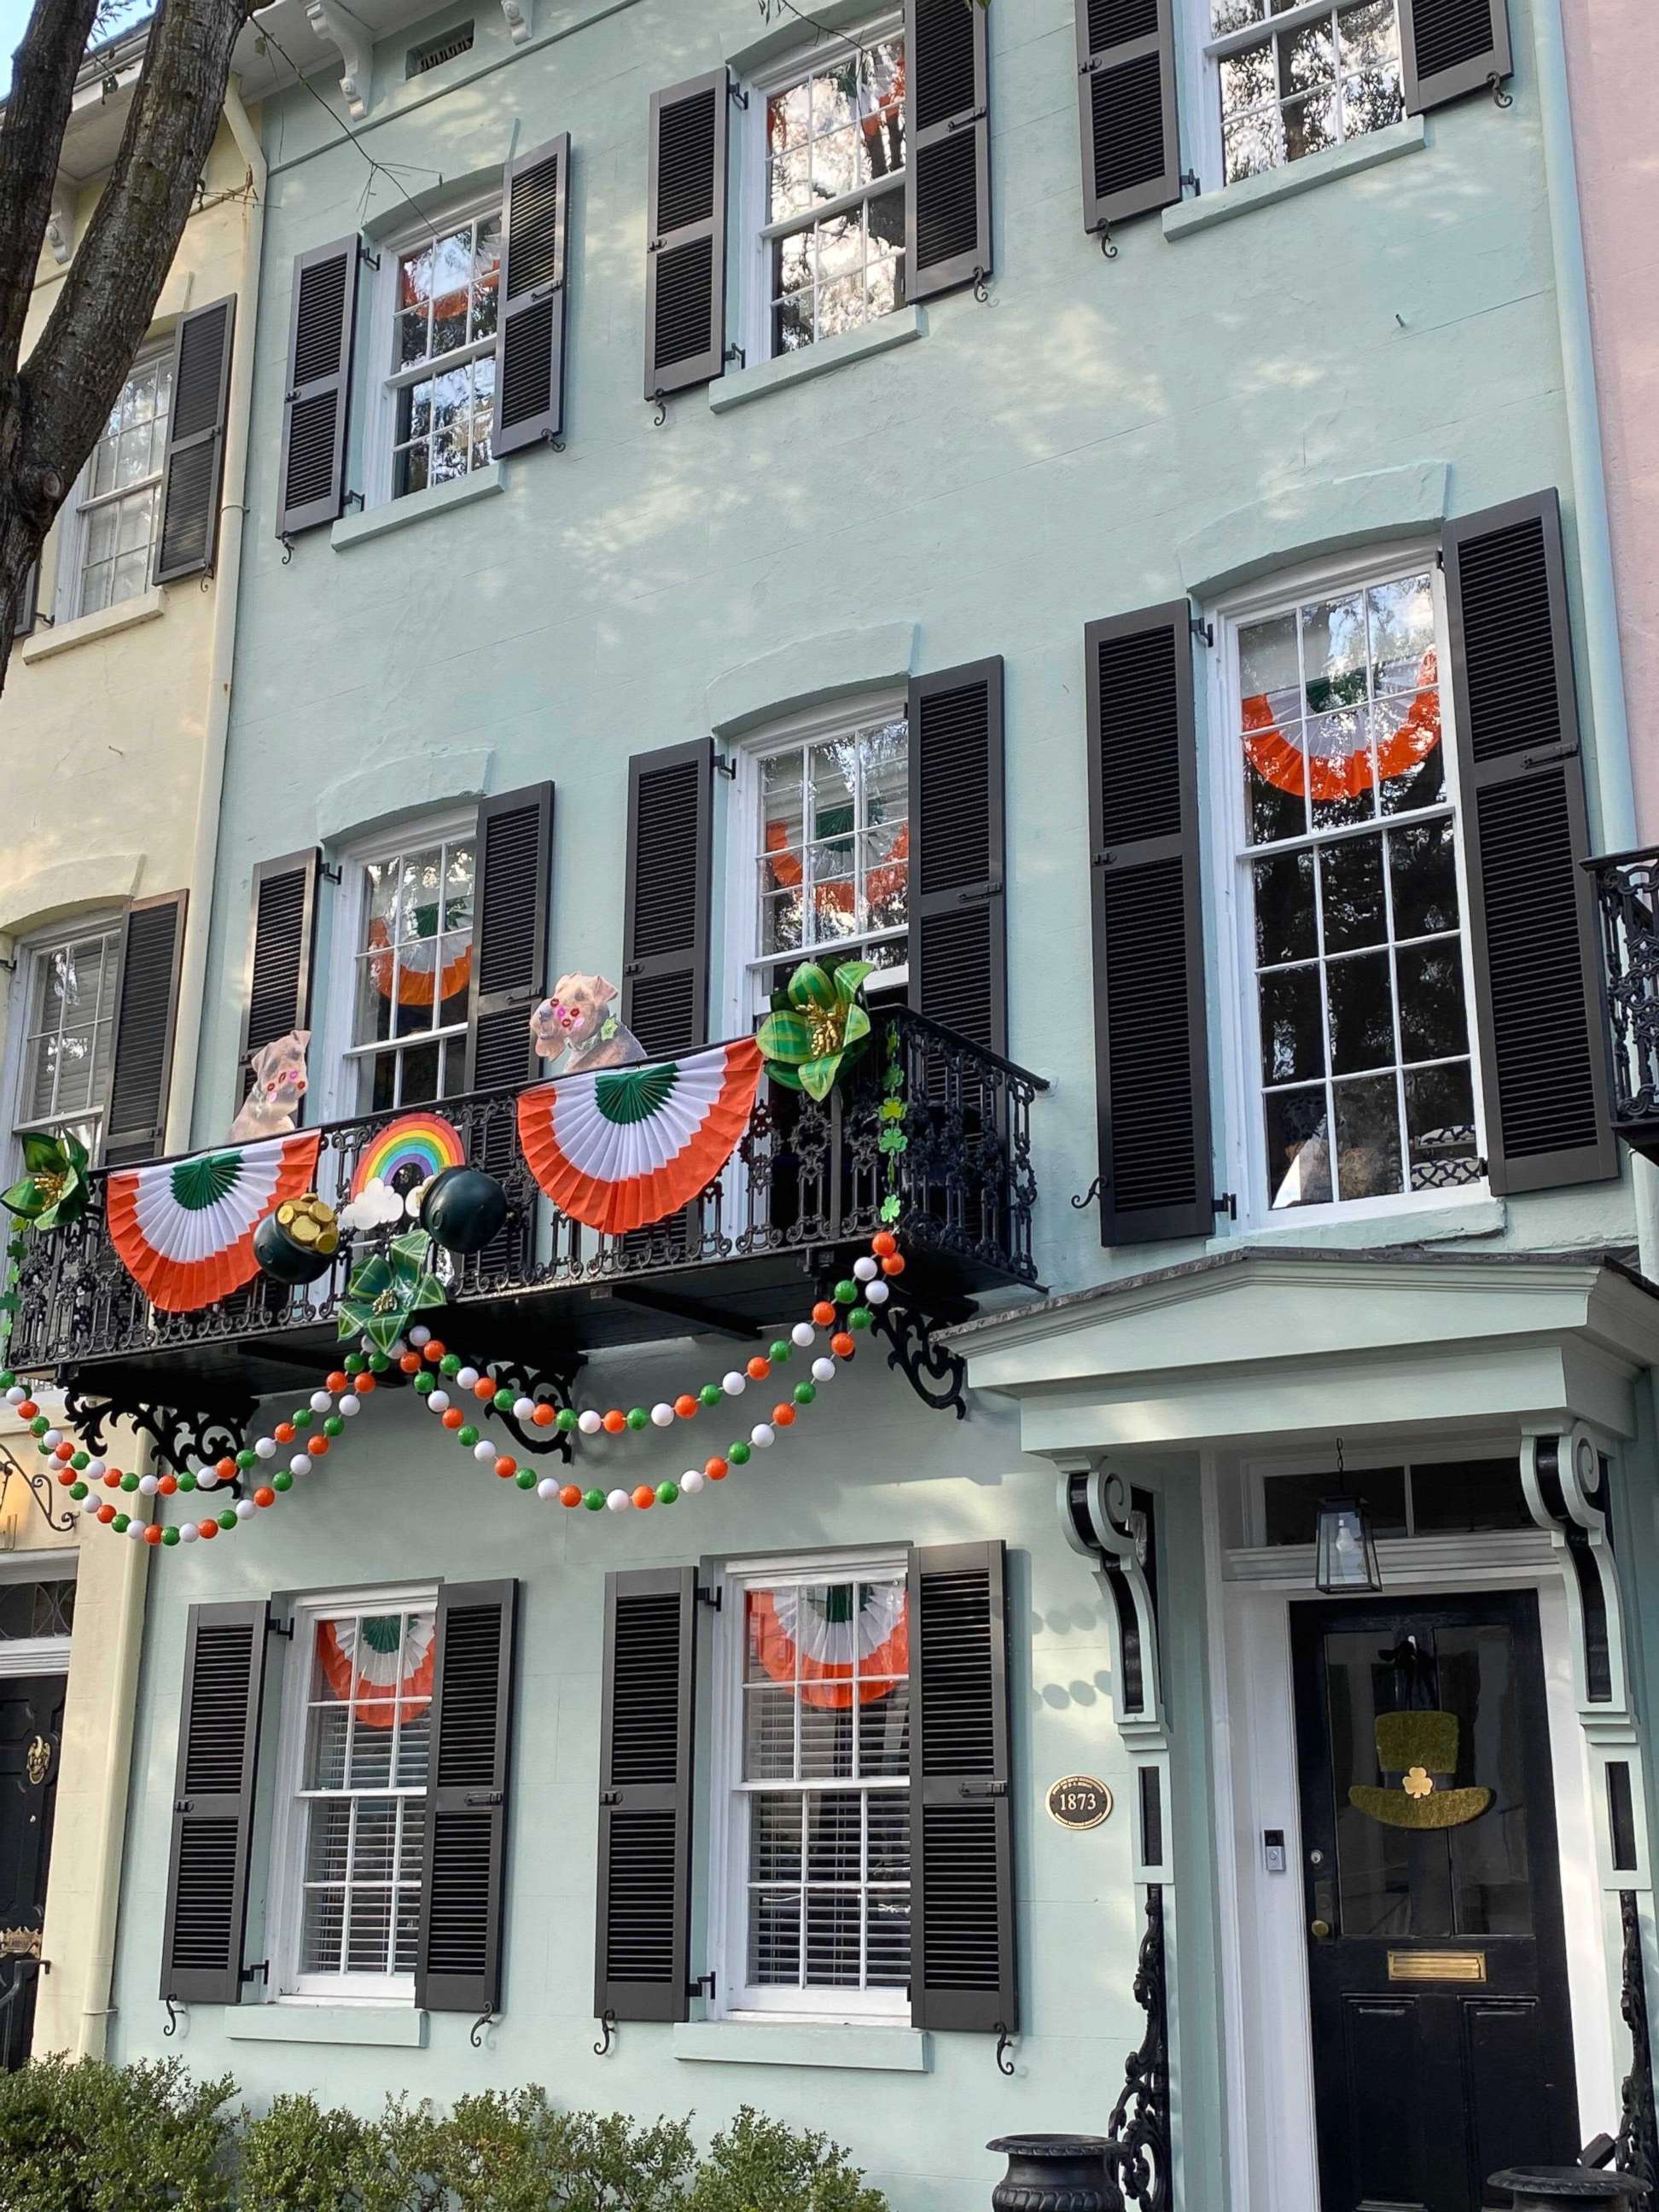 PHOTO: A home in Savannah, Georgia, decorated for Saint Patrick's Day.